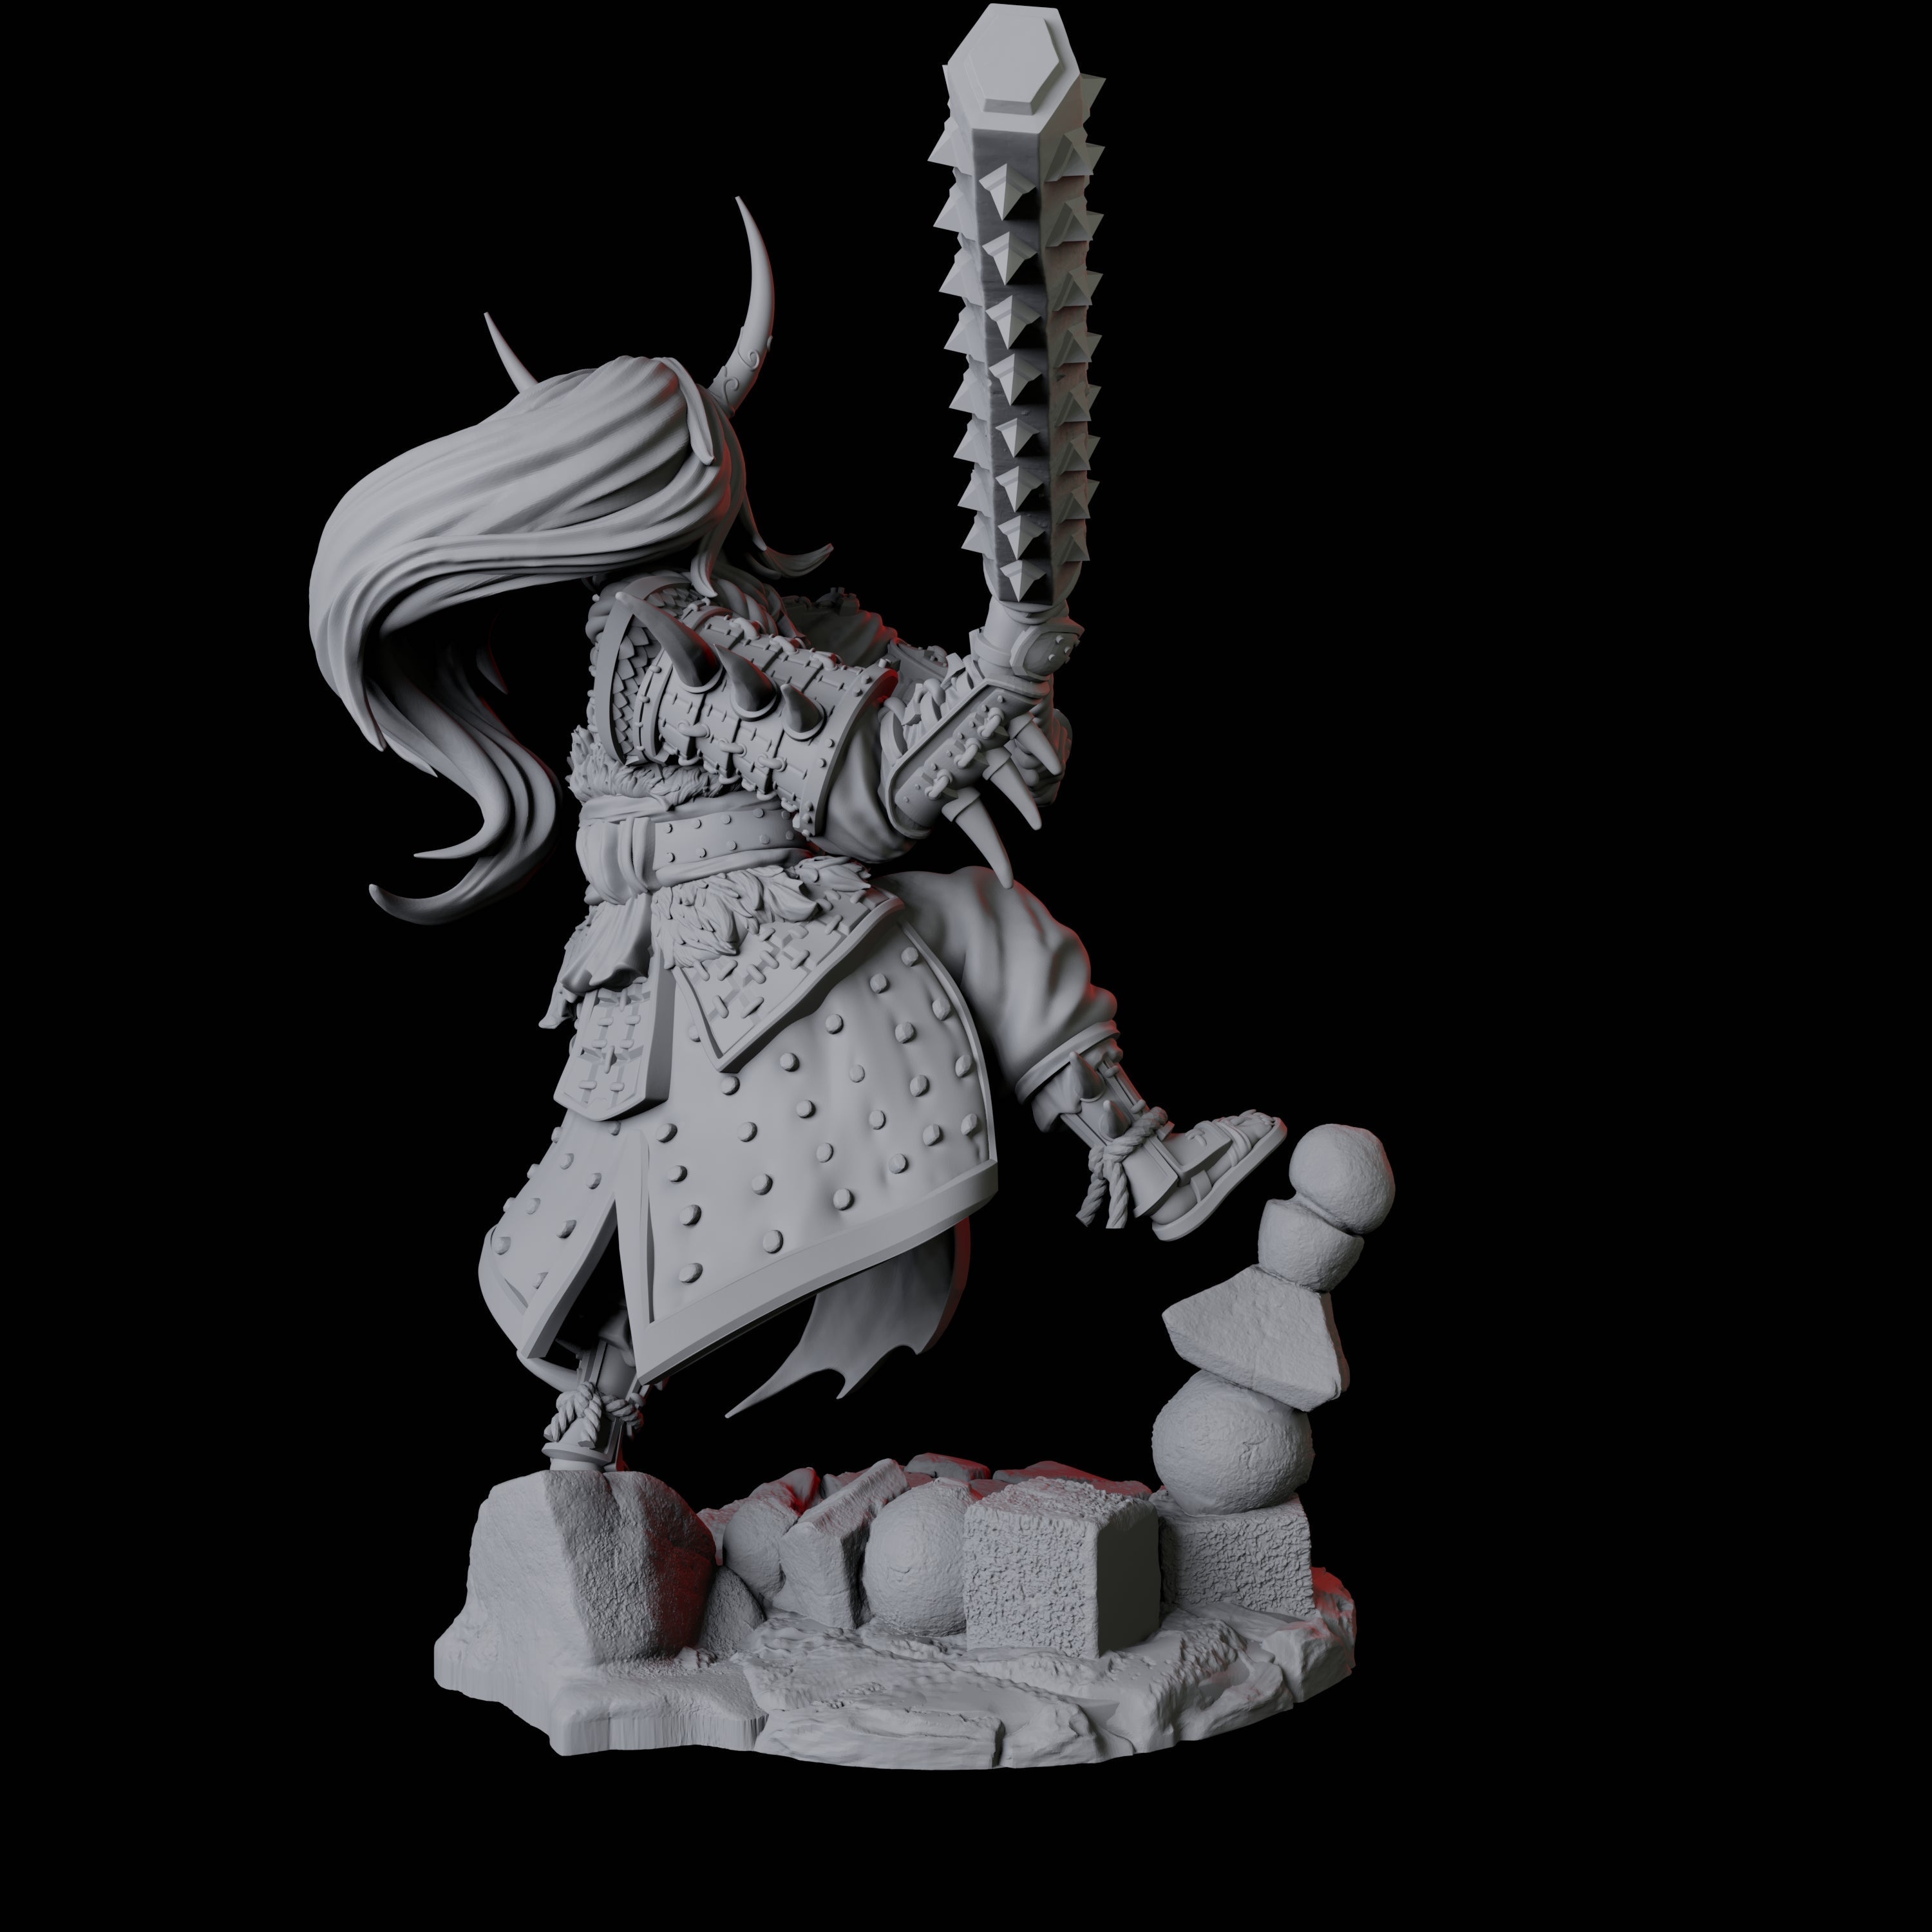 Oni Death Samurai C Miniature for Dungeons and Dragons, Pathfinder or other TTRPGs